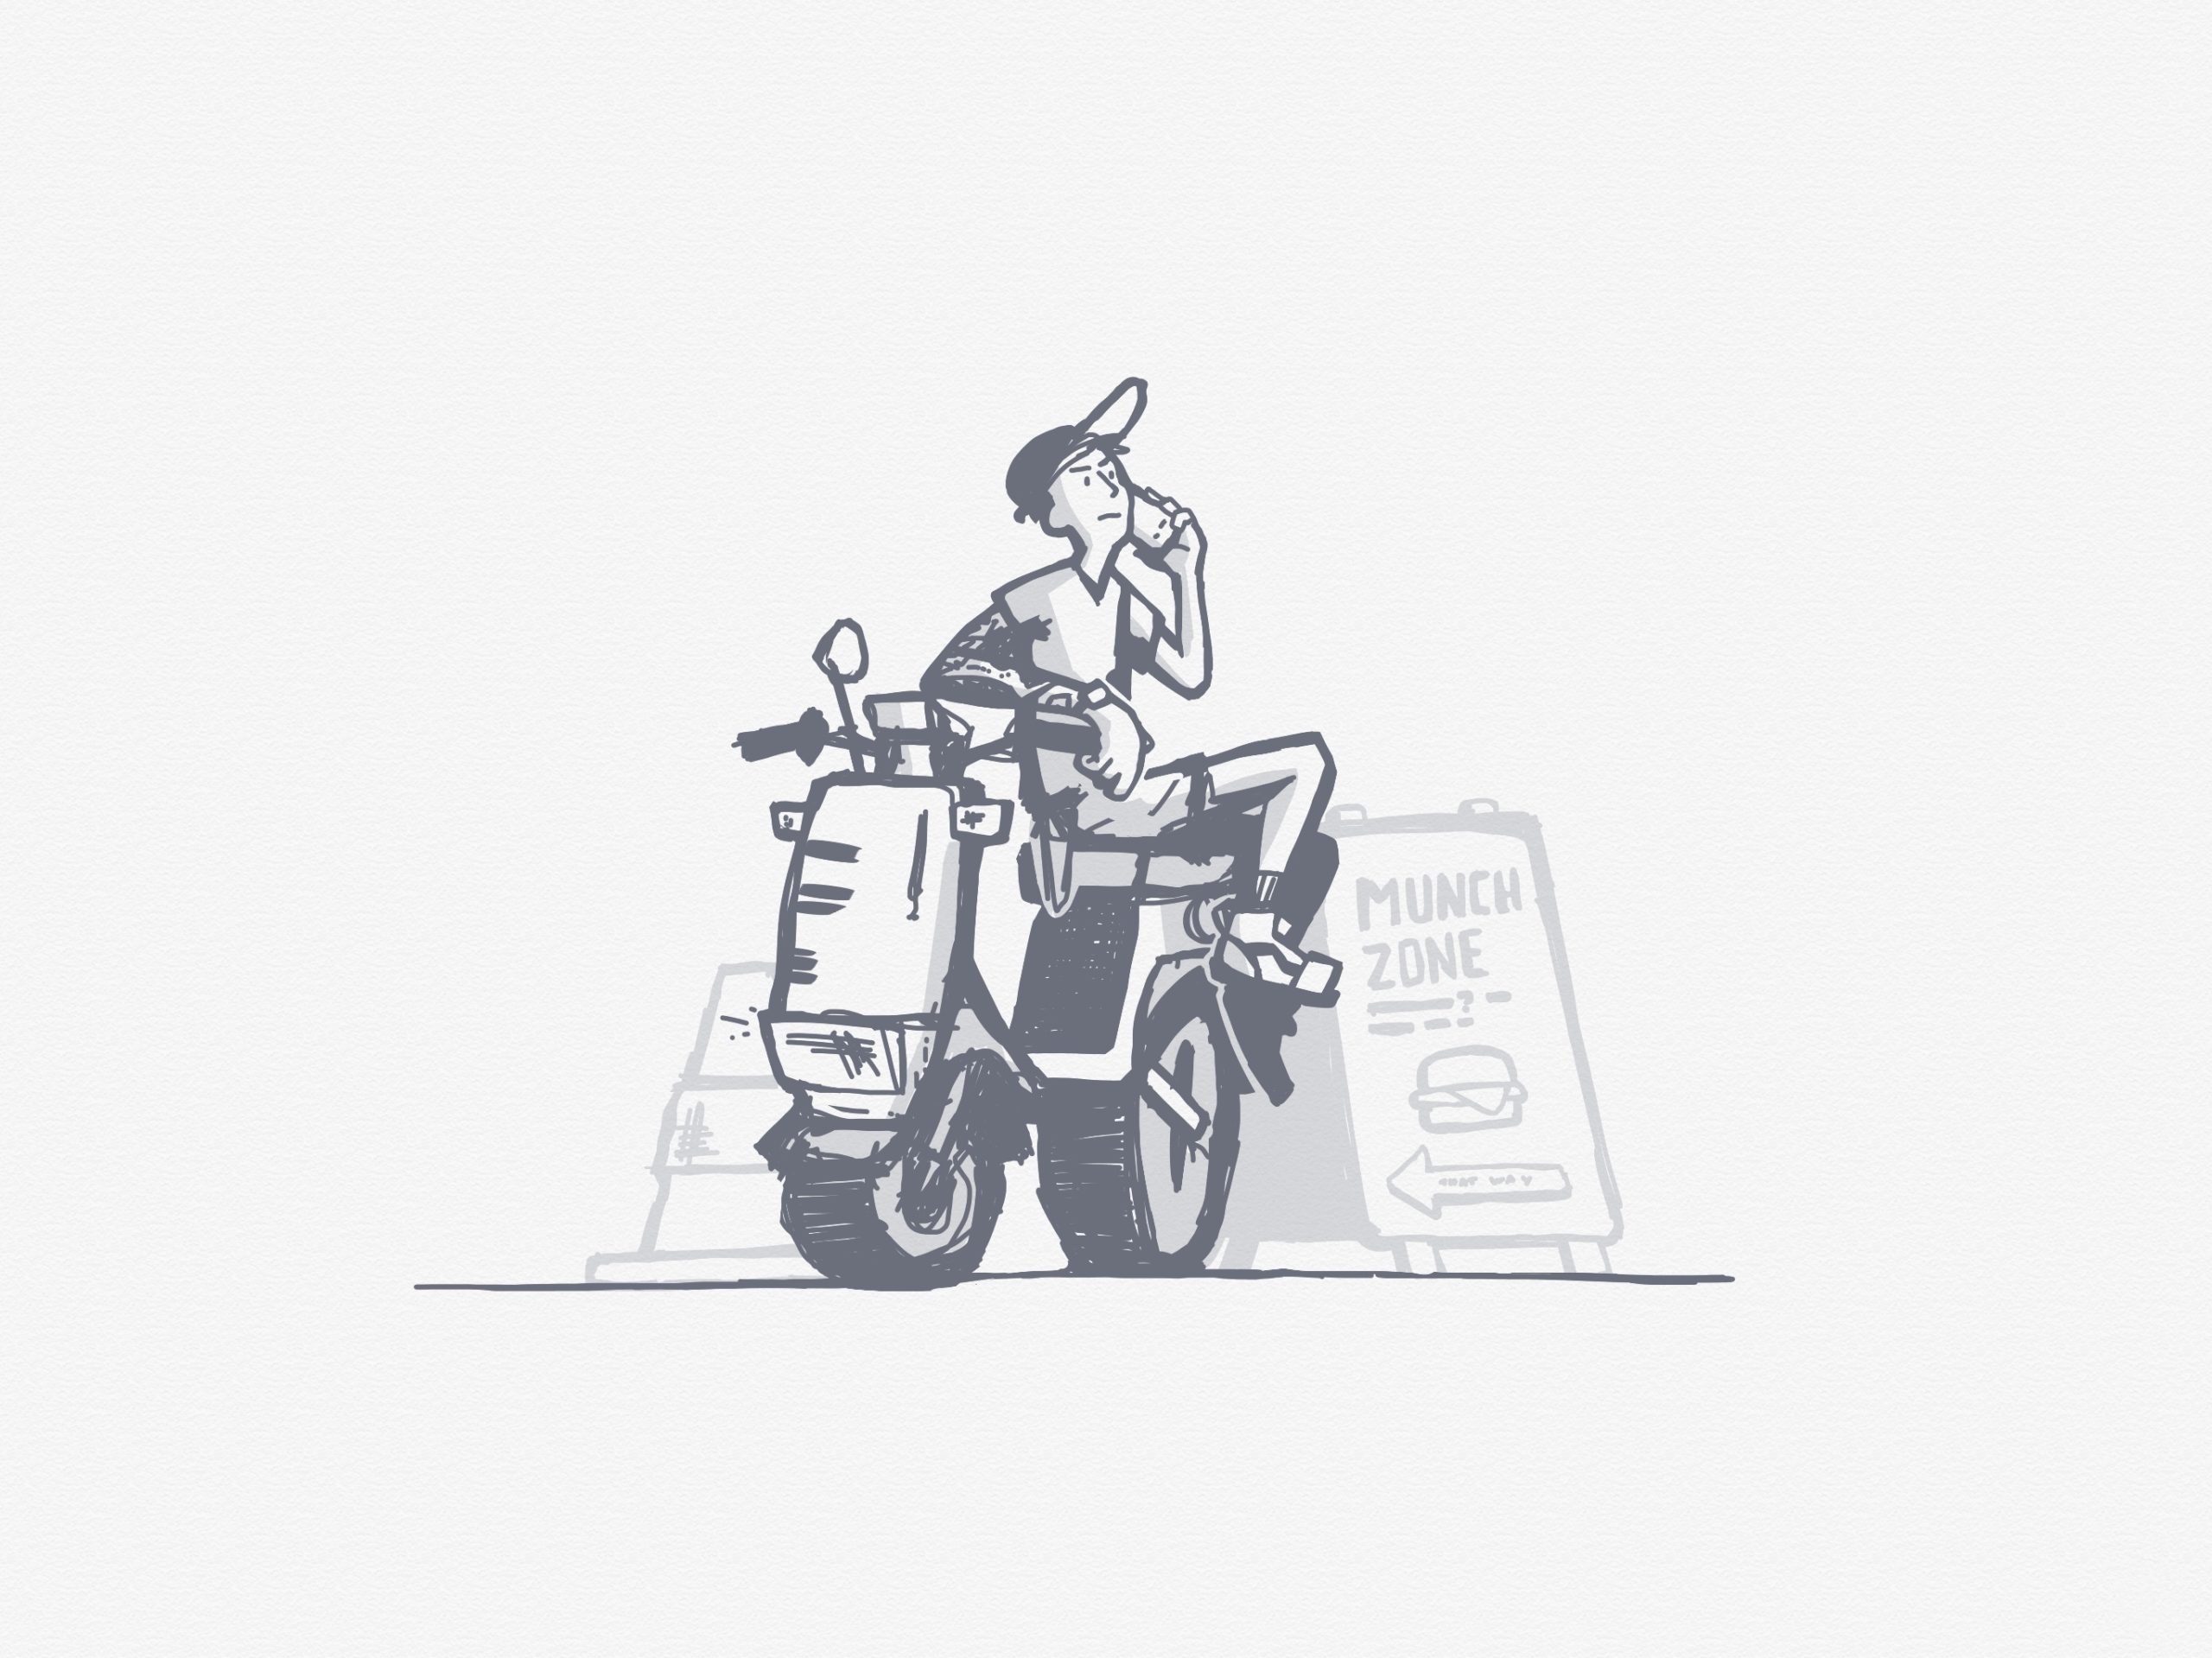 A guy sitting on a moped.